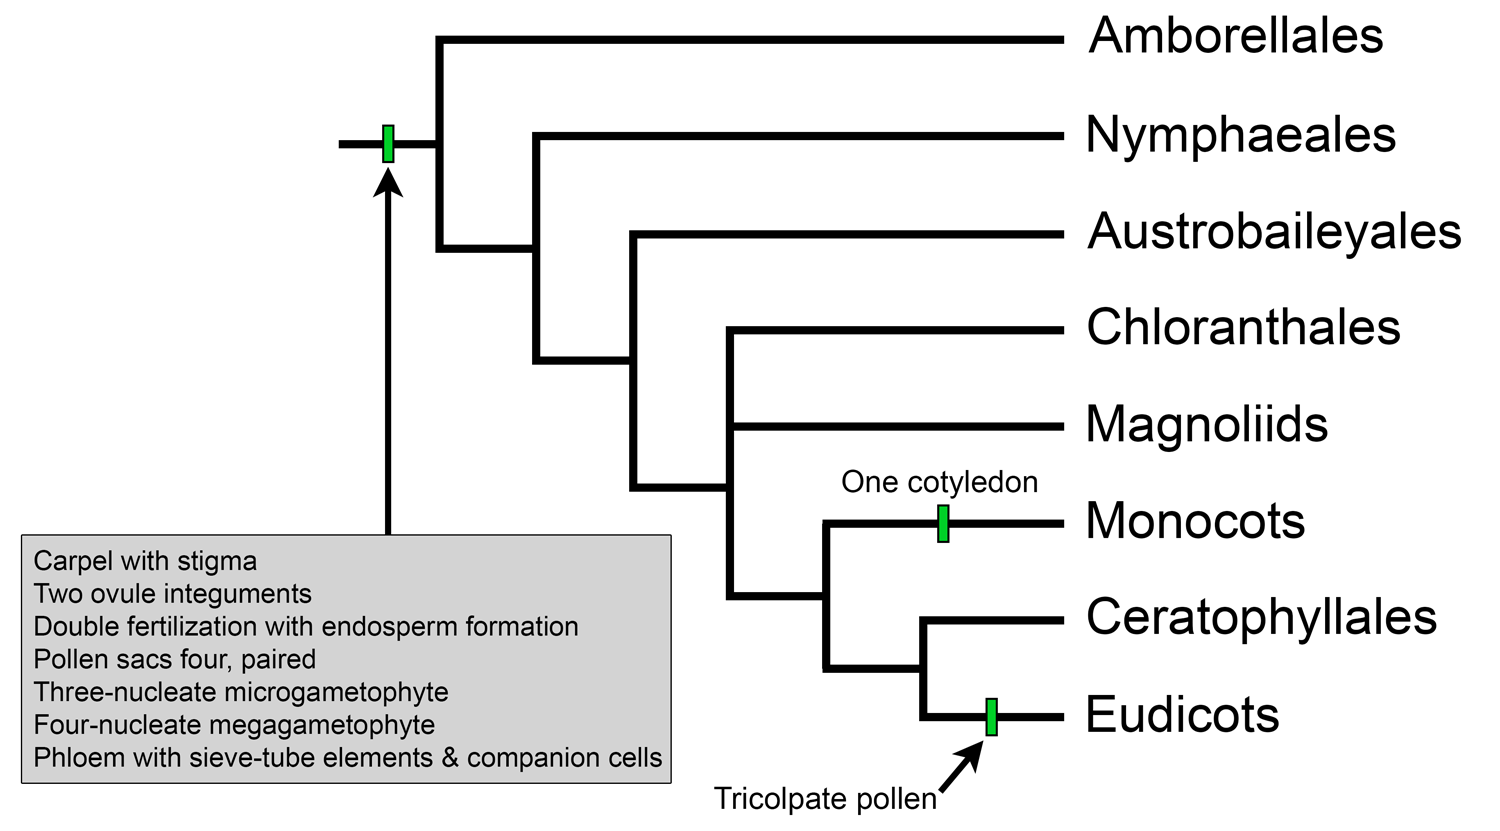 Tree of angiosperm relationships under the APG IV system, 2016.